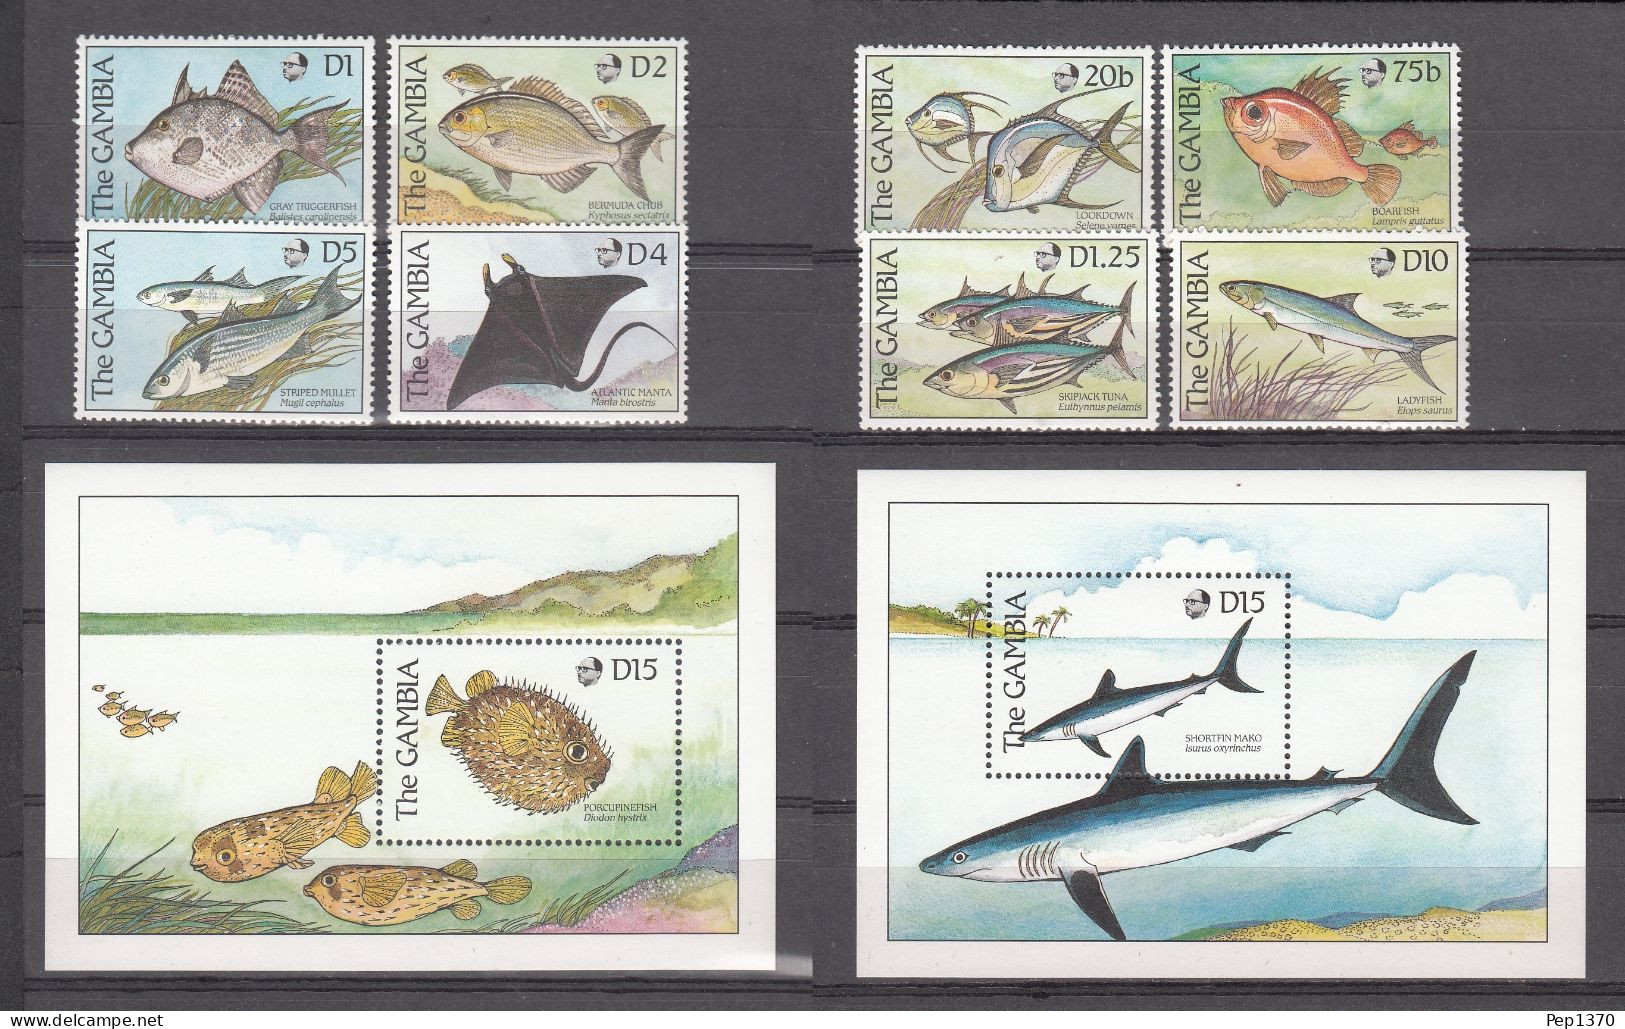 GAMBIA 1989 - PECES - FISHES - POISSONS - YVERT 829/832 + 837/840** + HB-74 + HB-76** - Fishes